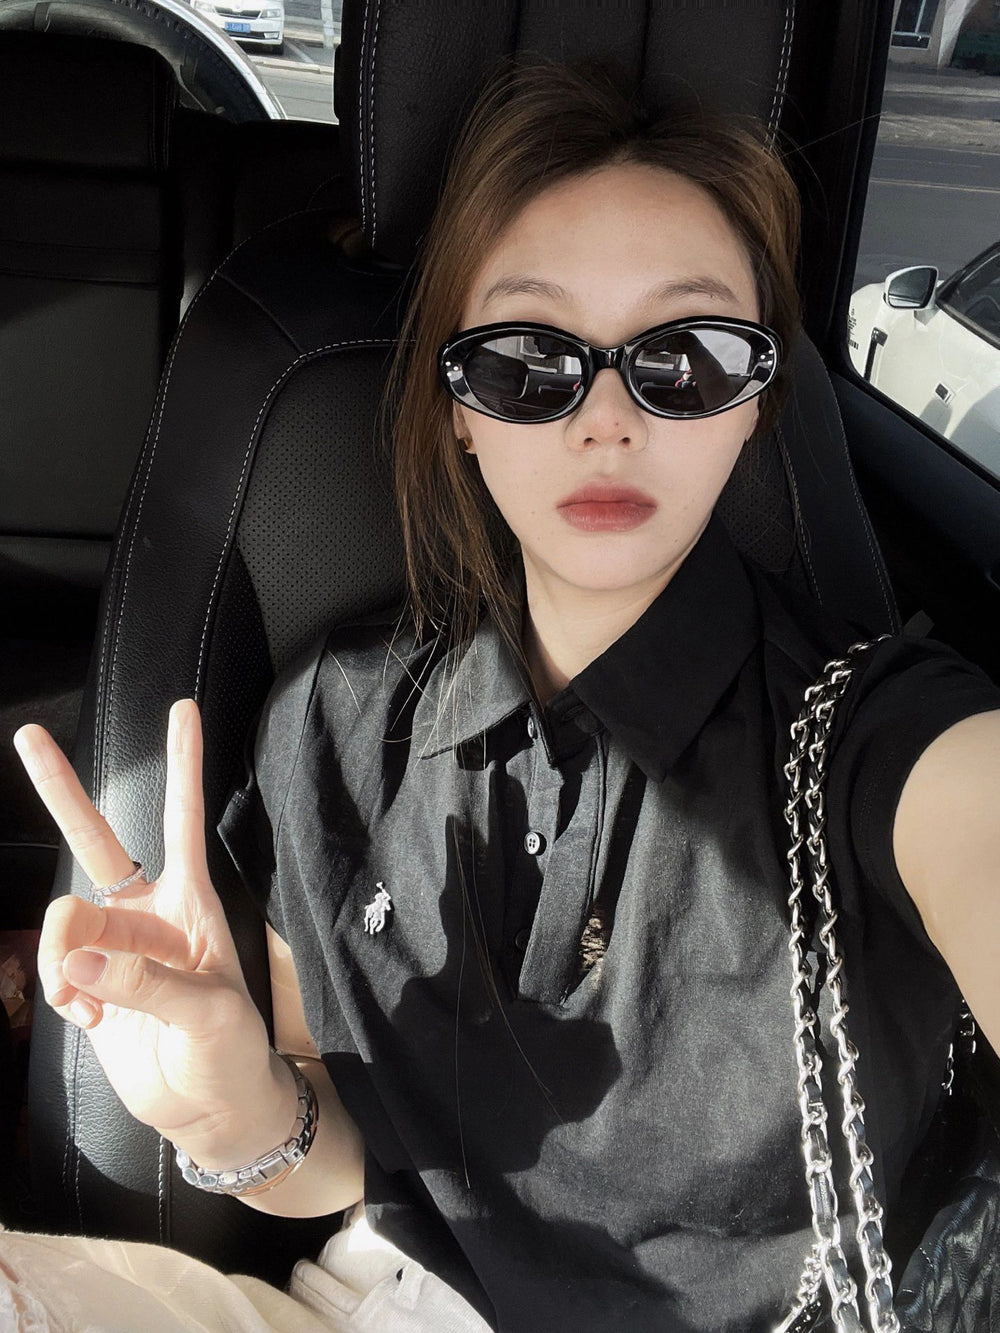 With an air of sophistication, a woman sporting trendy sunglasses and a sleek black shirt relaxes in the back seat of a luxurious car.